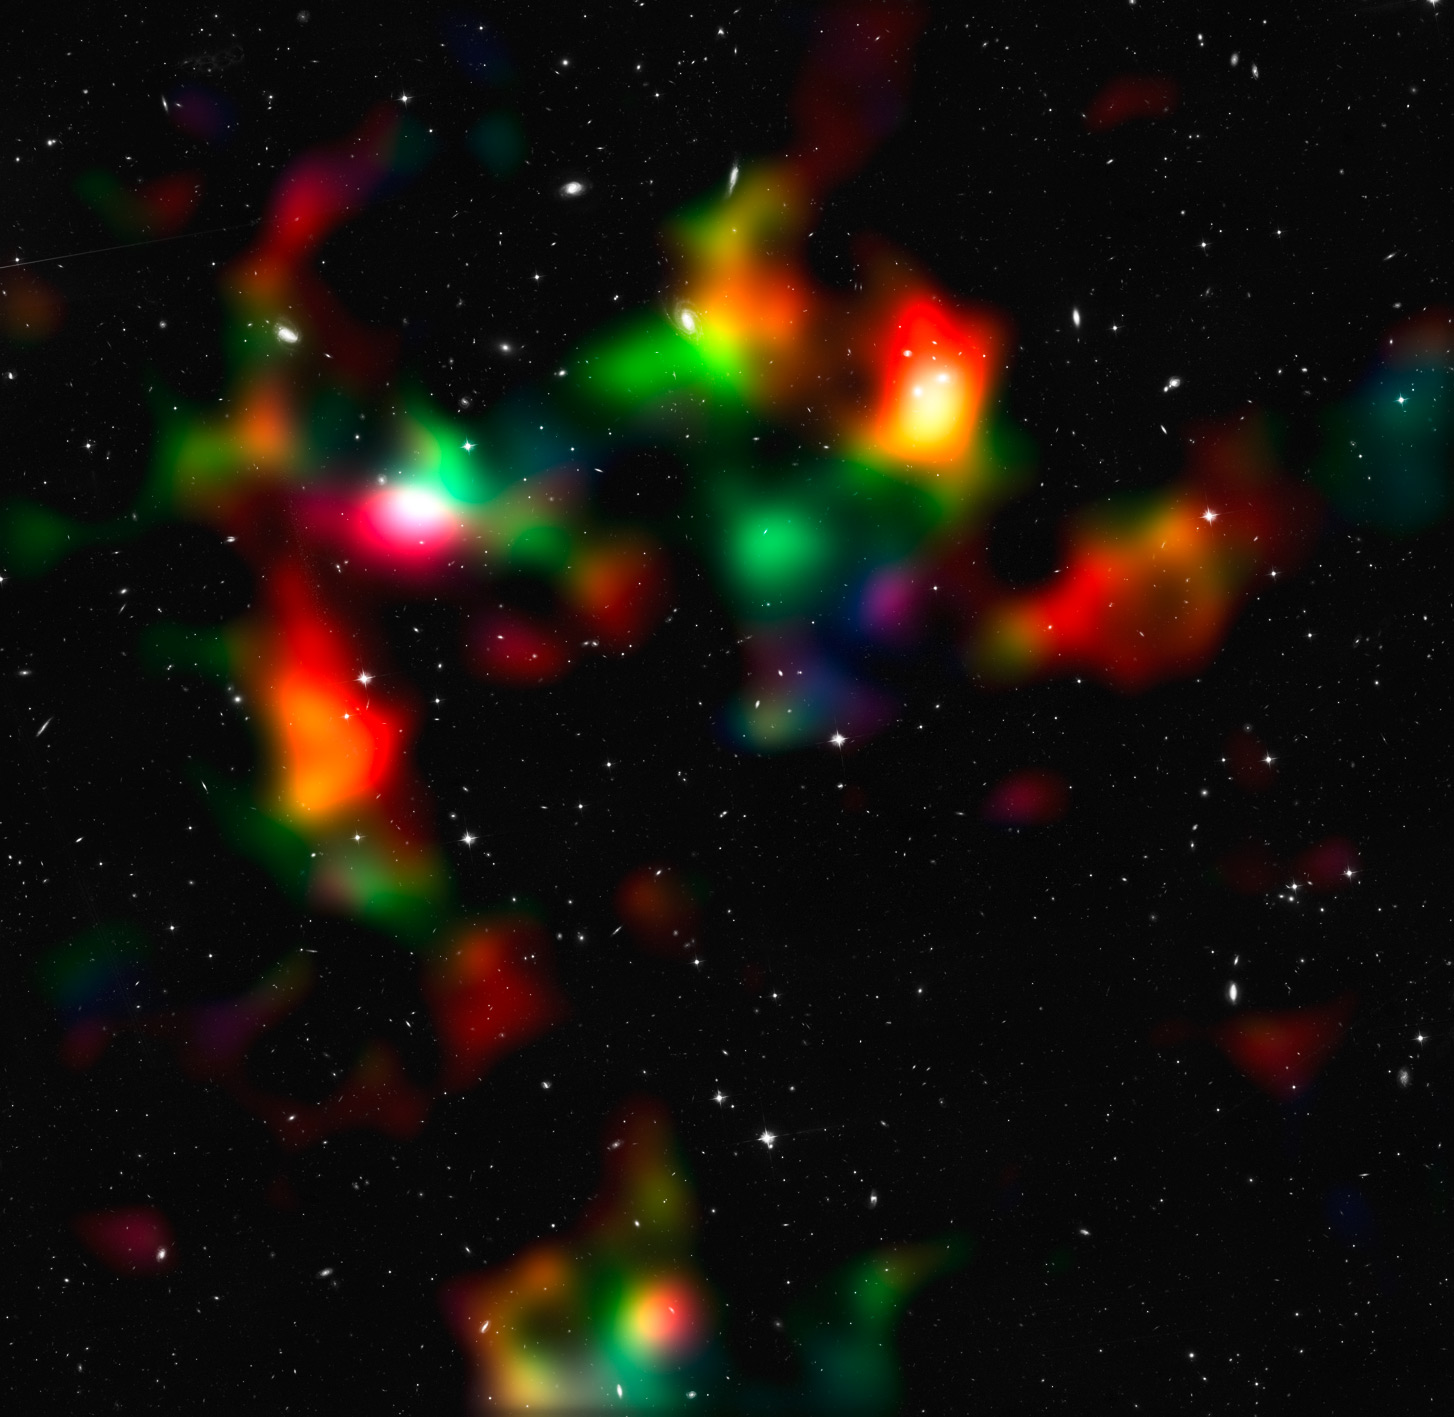 This image shows a smoothed reconstruction of the total (mostly dark) matter distribution in the COSMOS field, created from data taken by the Hubble Space Telescope and ground-based telescopes. It was inferred from the weak gravitational lensing distortions that are imprinted onto the shapes of background galaxies. The colour coding indicates the distance of the foreground mass concentrations as gathered from the weak lensing effect. Structures shown in white, cyan, and green are typically closer to us than those indicated in orange and red. To improve the resolution of the map, data from galaxies both with and without redshift information were used. The new study presents the most comprehensive analysis of data from the COSMOS survey. The researchers have, for the first time ever, used Hubble and the natural “weak lenses” in space to characterise the accelerated expansion of the Universe. Credit: NASA, ESA, P. Simon (University of Bonn) and T. Schrabback (Leiden Observatory)